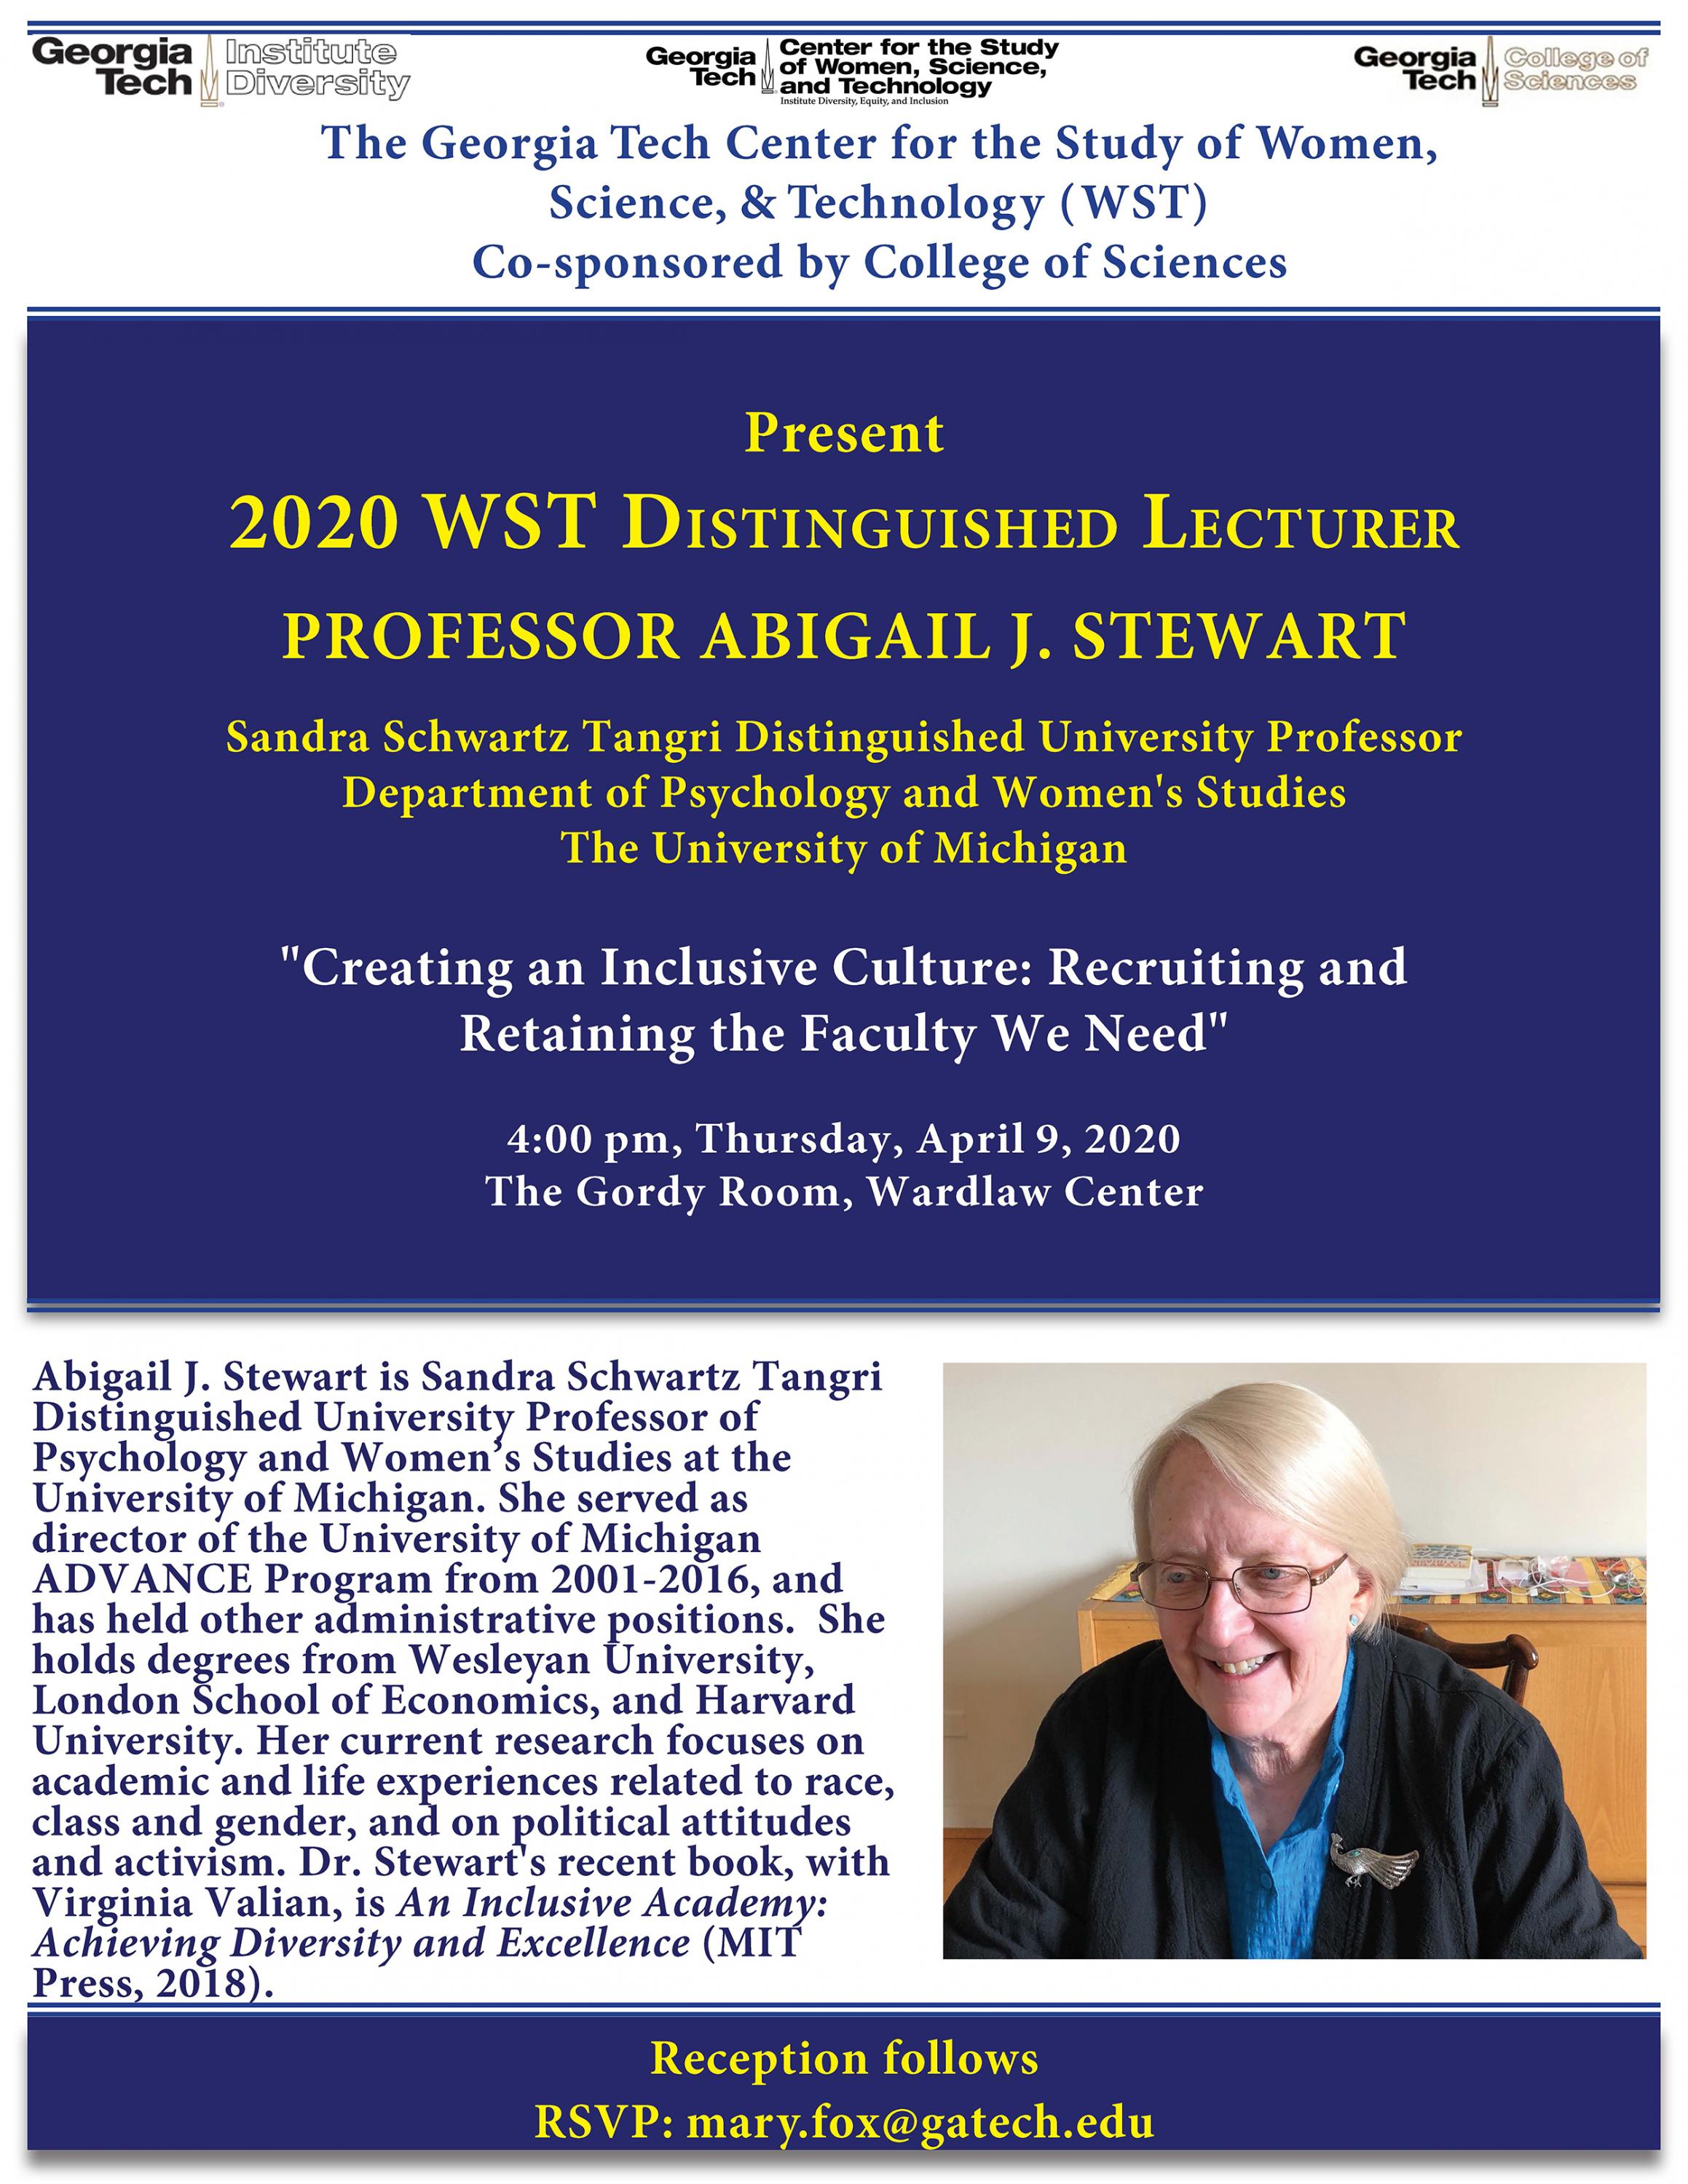 The 2020 WST Distinguished Lecture is April 9 with Abigail J. Stewart